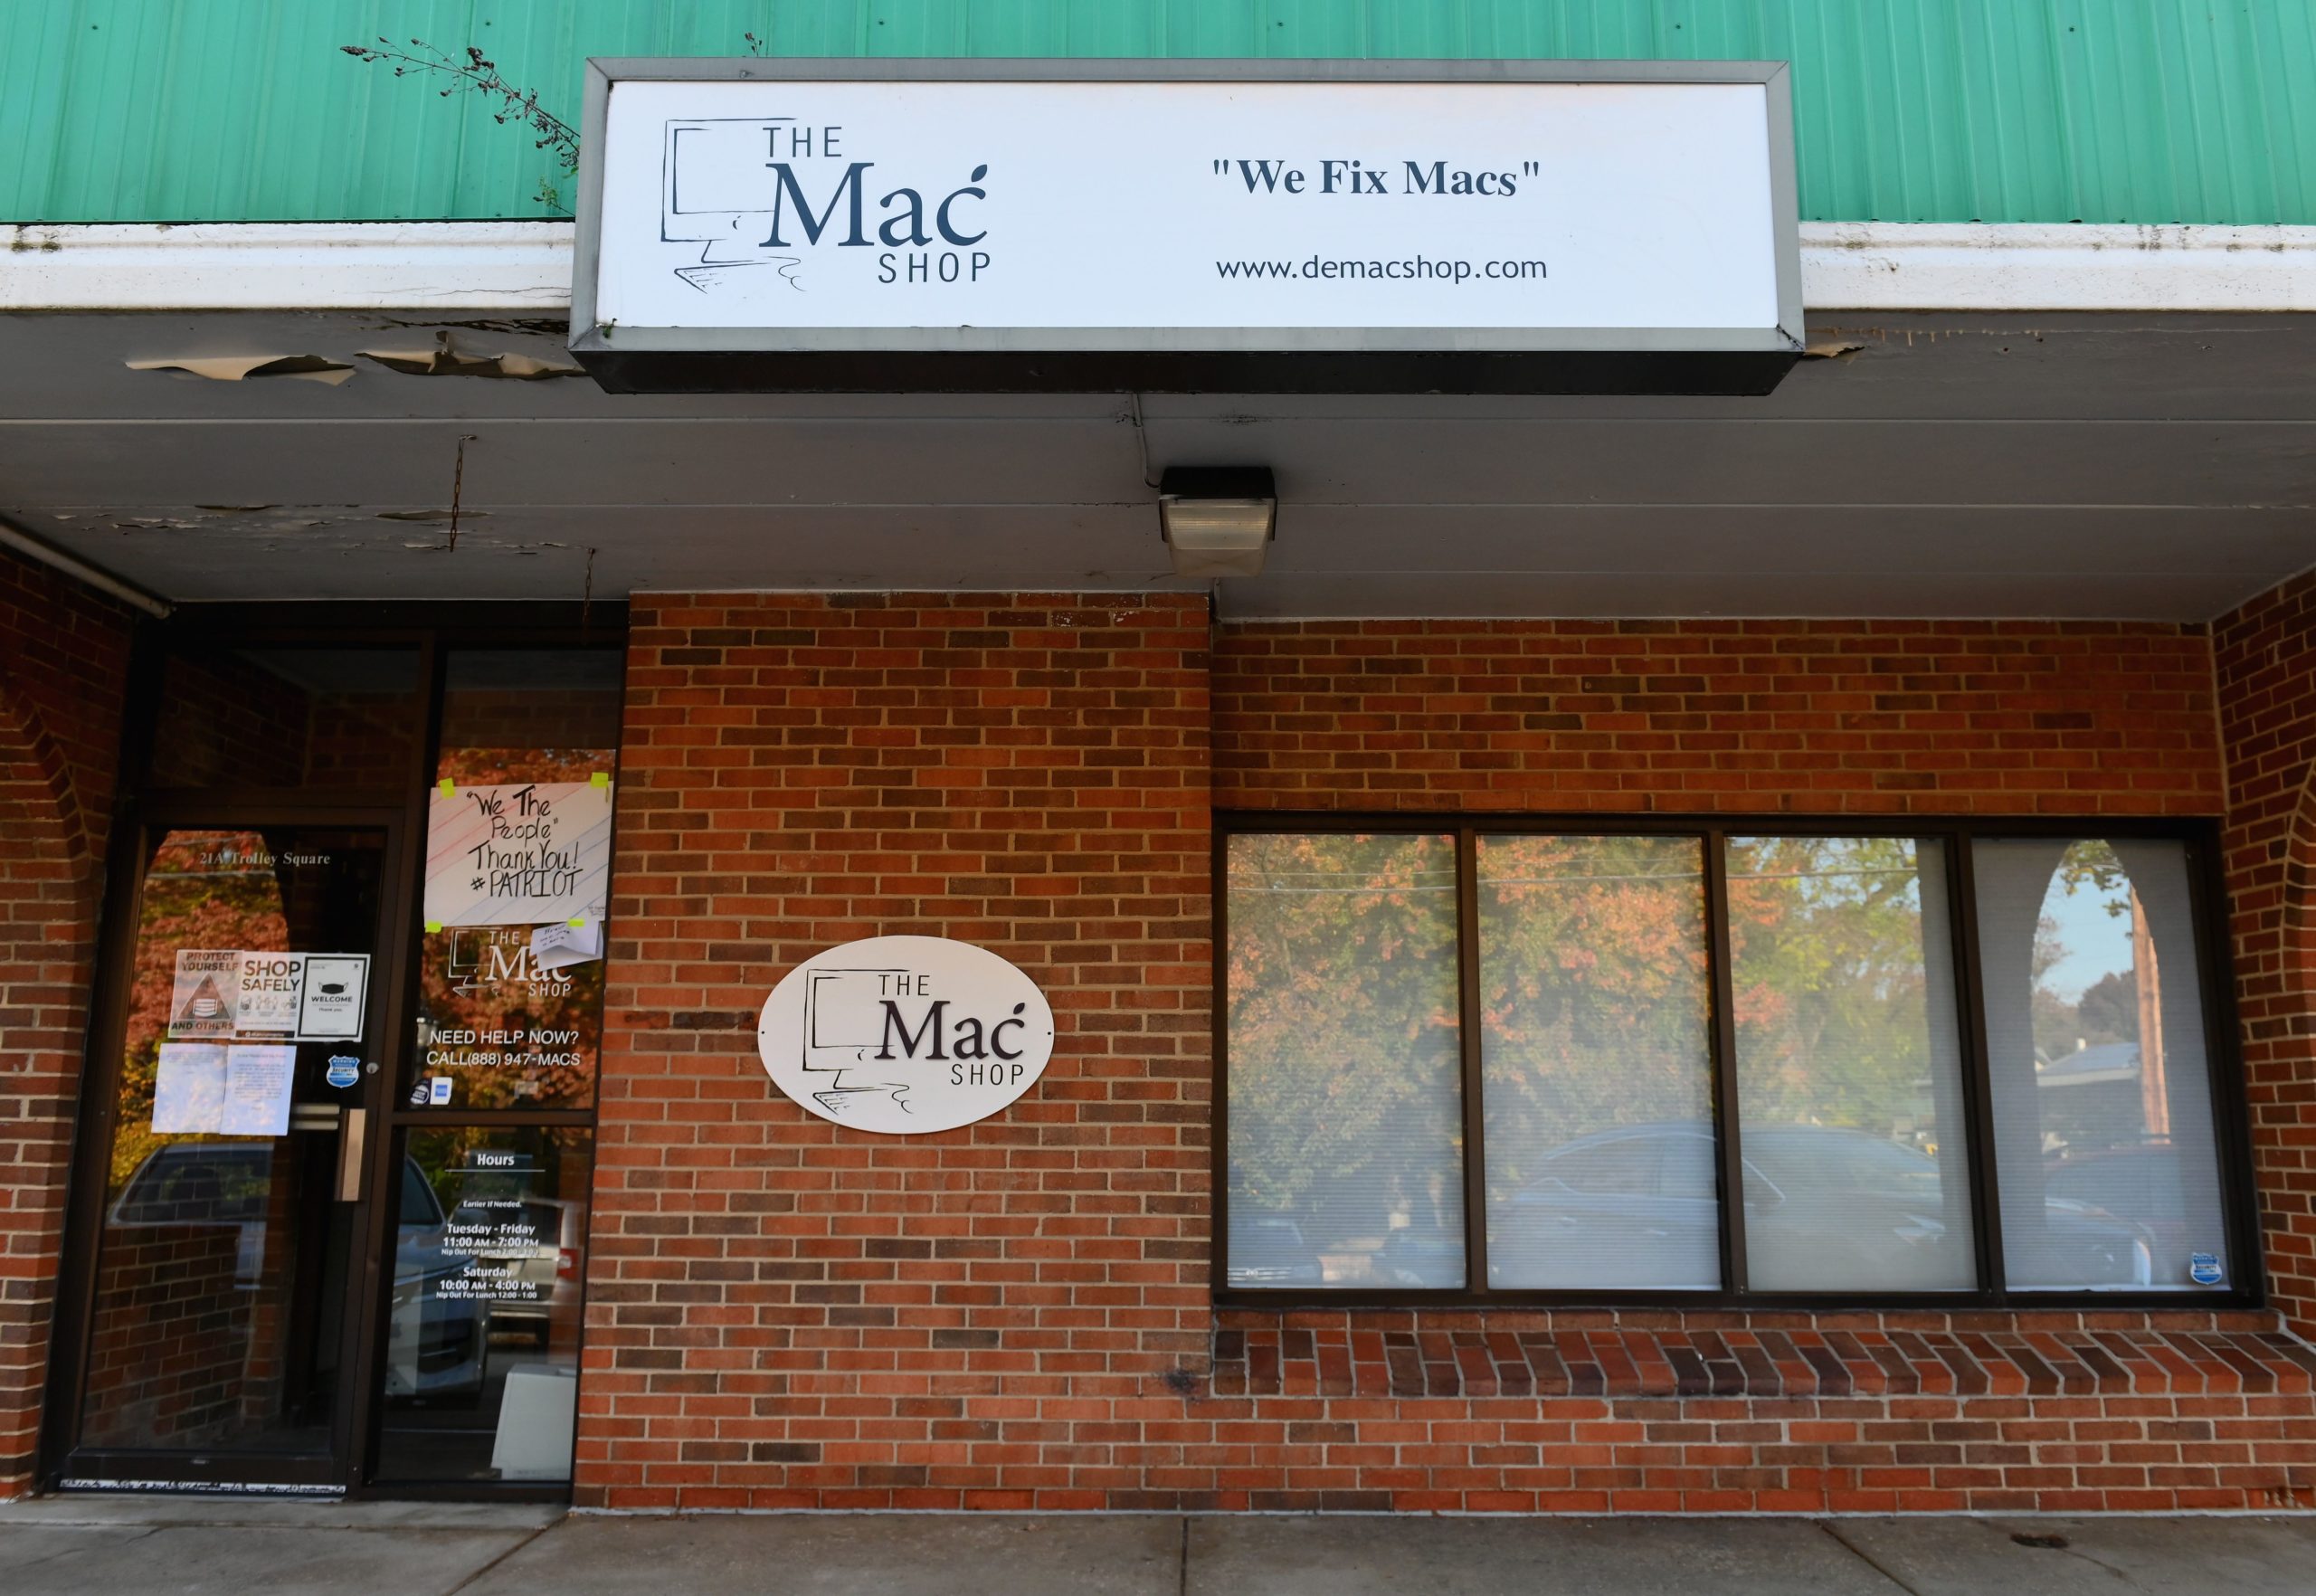 An exterior view of "The Mac Shop" in Wilmington, Delaware is seen on October 21, 2020. - The New York Post last week revived allegations against Hunter Biden with a story claiming it had obtained documents from a laptop owned by the former vice president's son which was brought in for repairs to the shop in April 2019 but never picked up. The Post claimed that emails found on the laptop showed that Hunter Biden introduced his father to a Burisma advisor, Vadym Pozharskyi, in 2015 and contradict Joe Biden's claims that he never spoke to his son about his overseas business dealings. The Post said the shop owner handed the laptop over to the FBI and also made a copy of the hard drive and gave it to former New York mayor Rudy Giuliani. (Photo by Angela Weiss / AFP) (Photo by ANGELA WEISS/AFP via Getty Images)